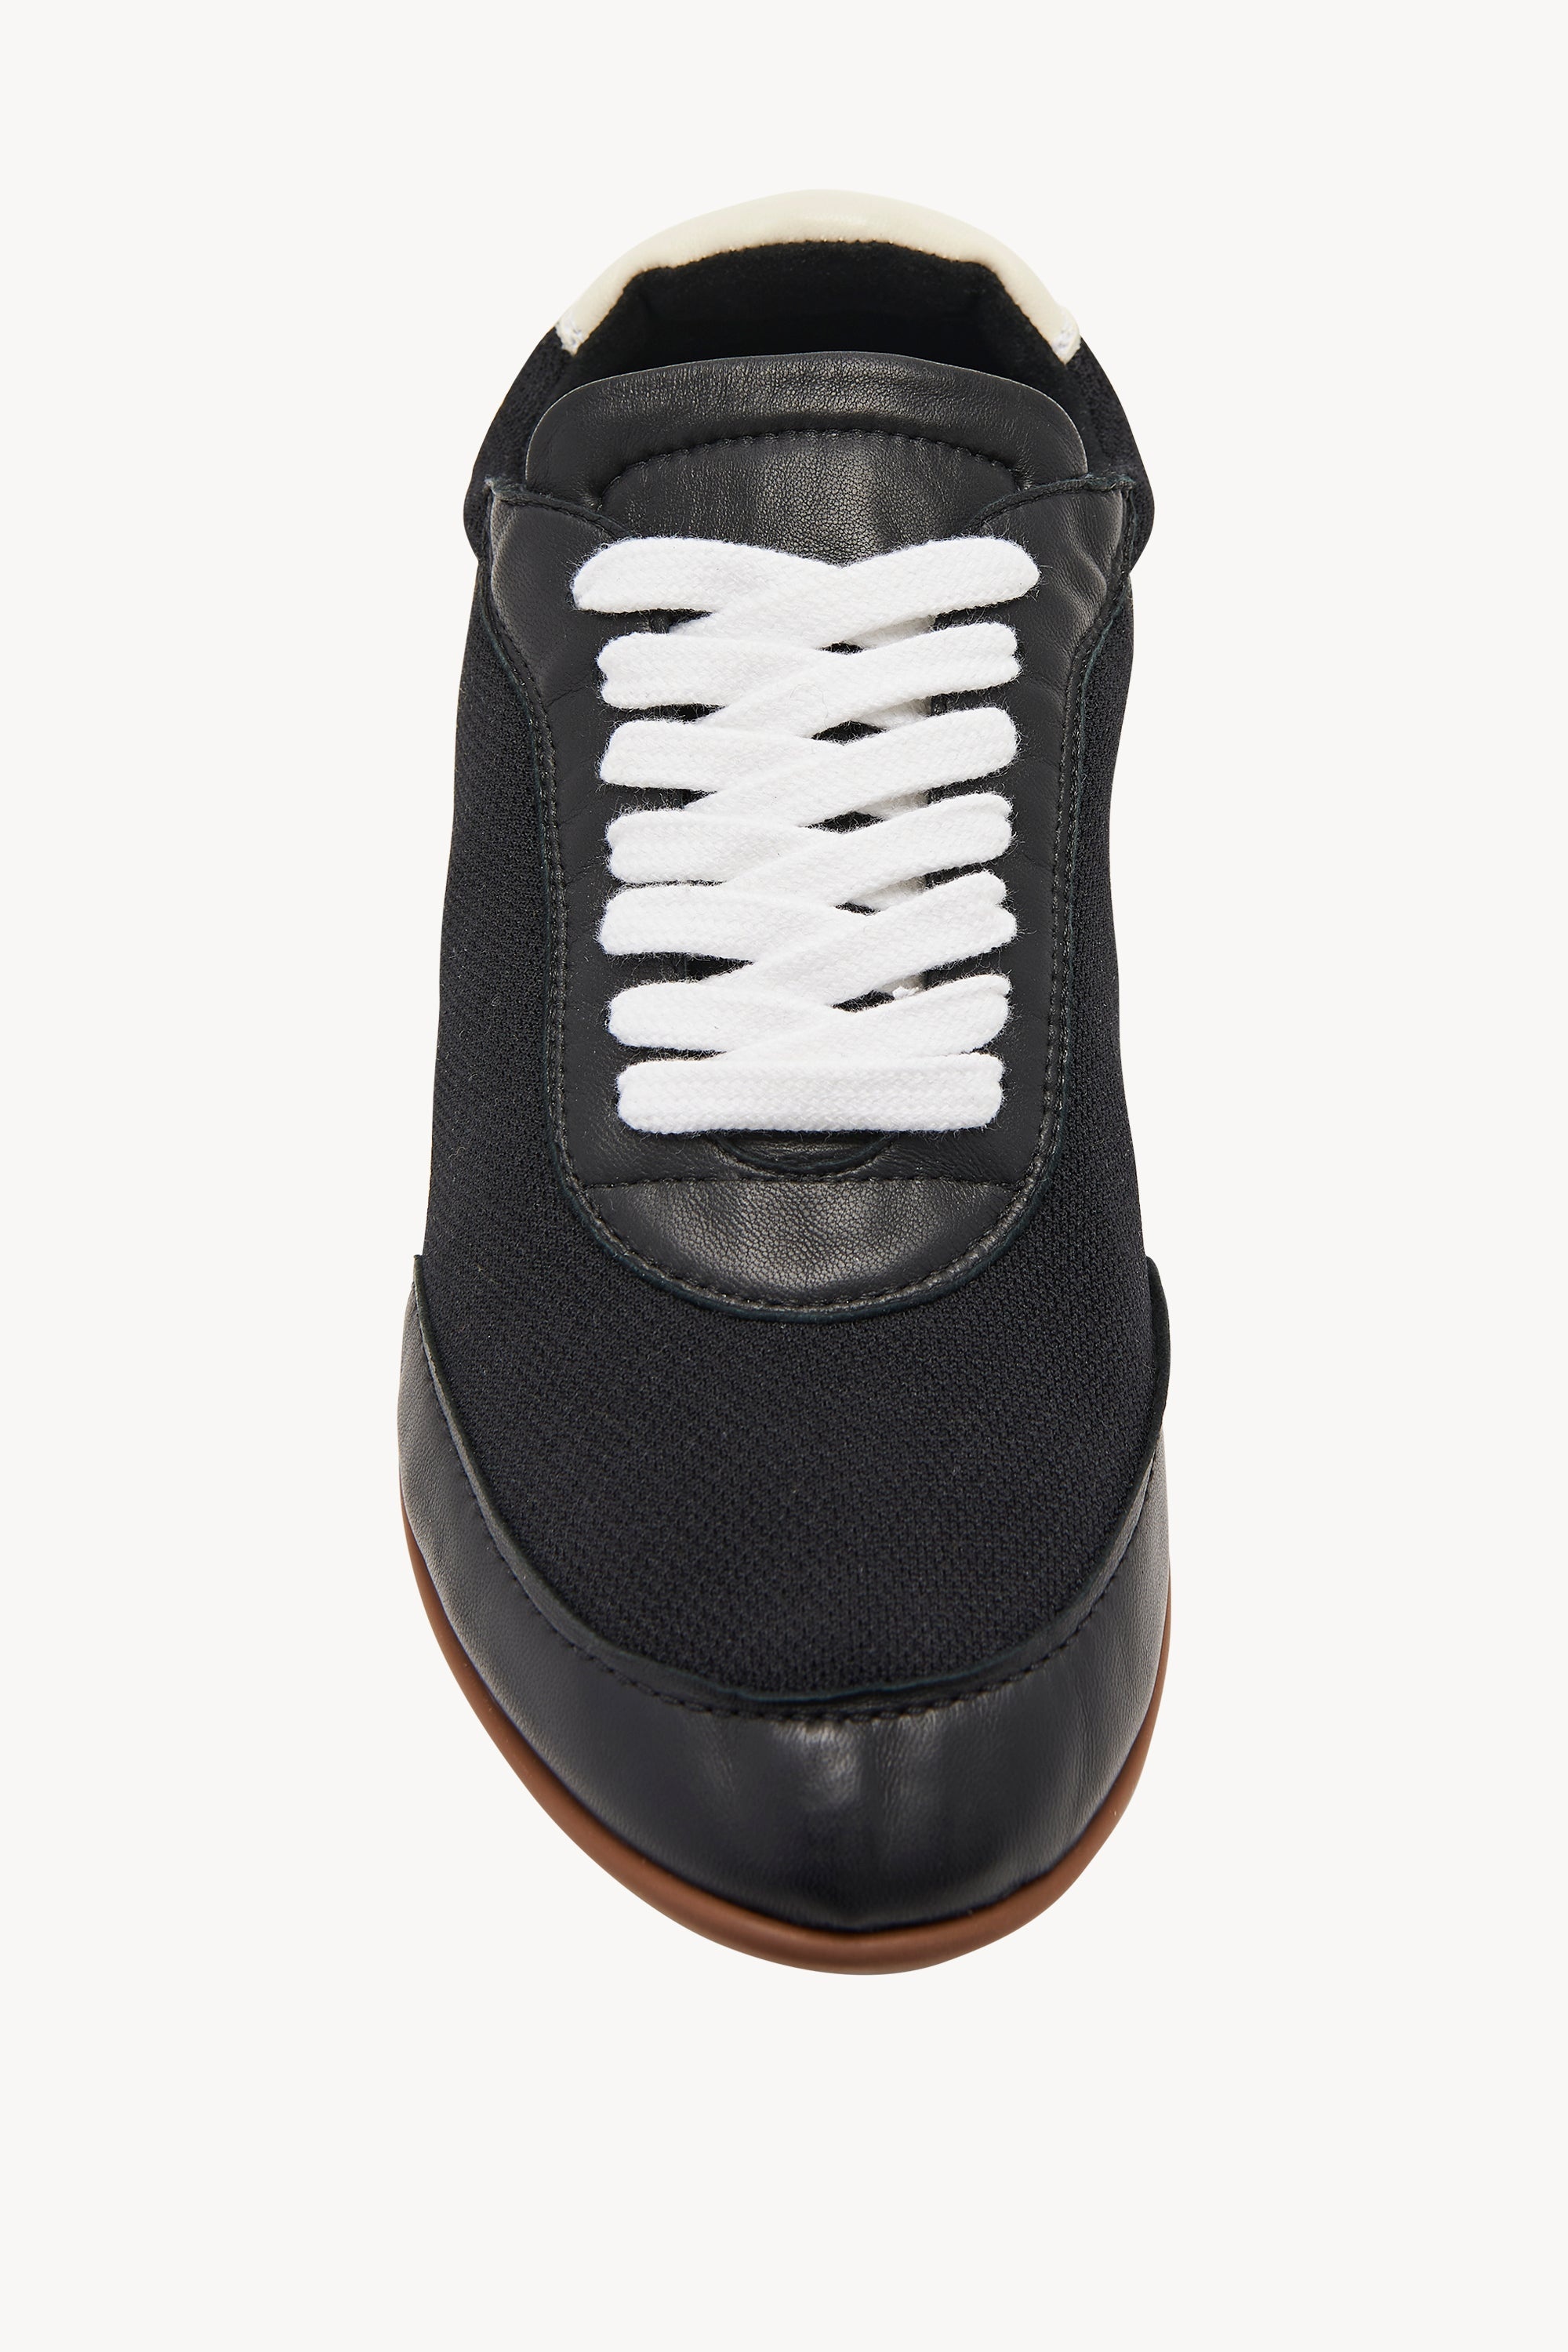 Owen City Sneaker in Leather and Mesh - 3